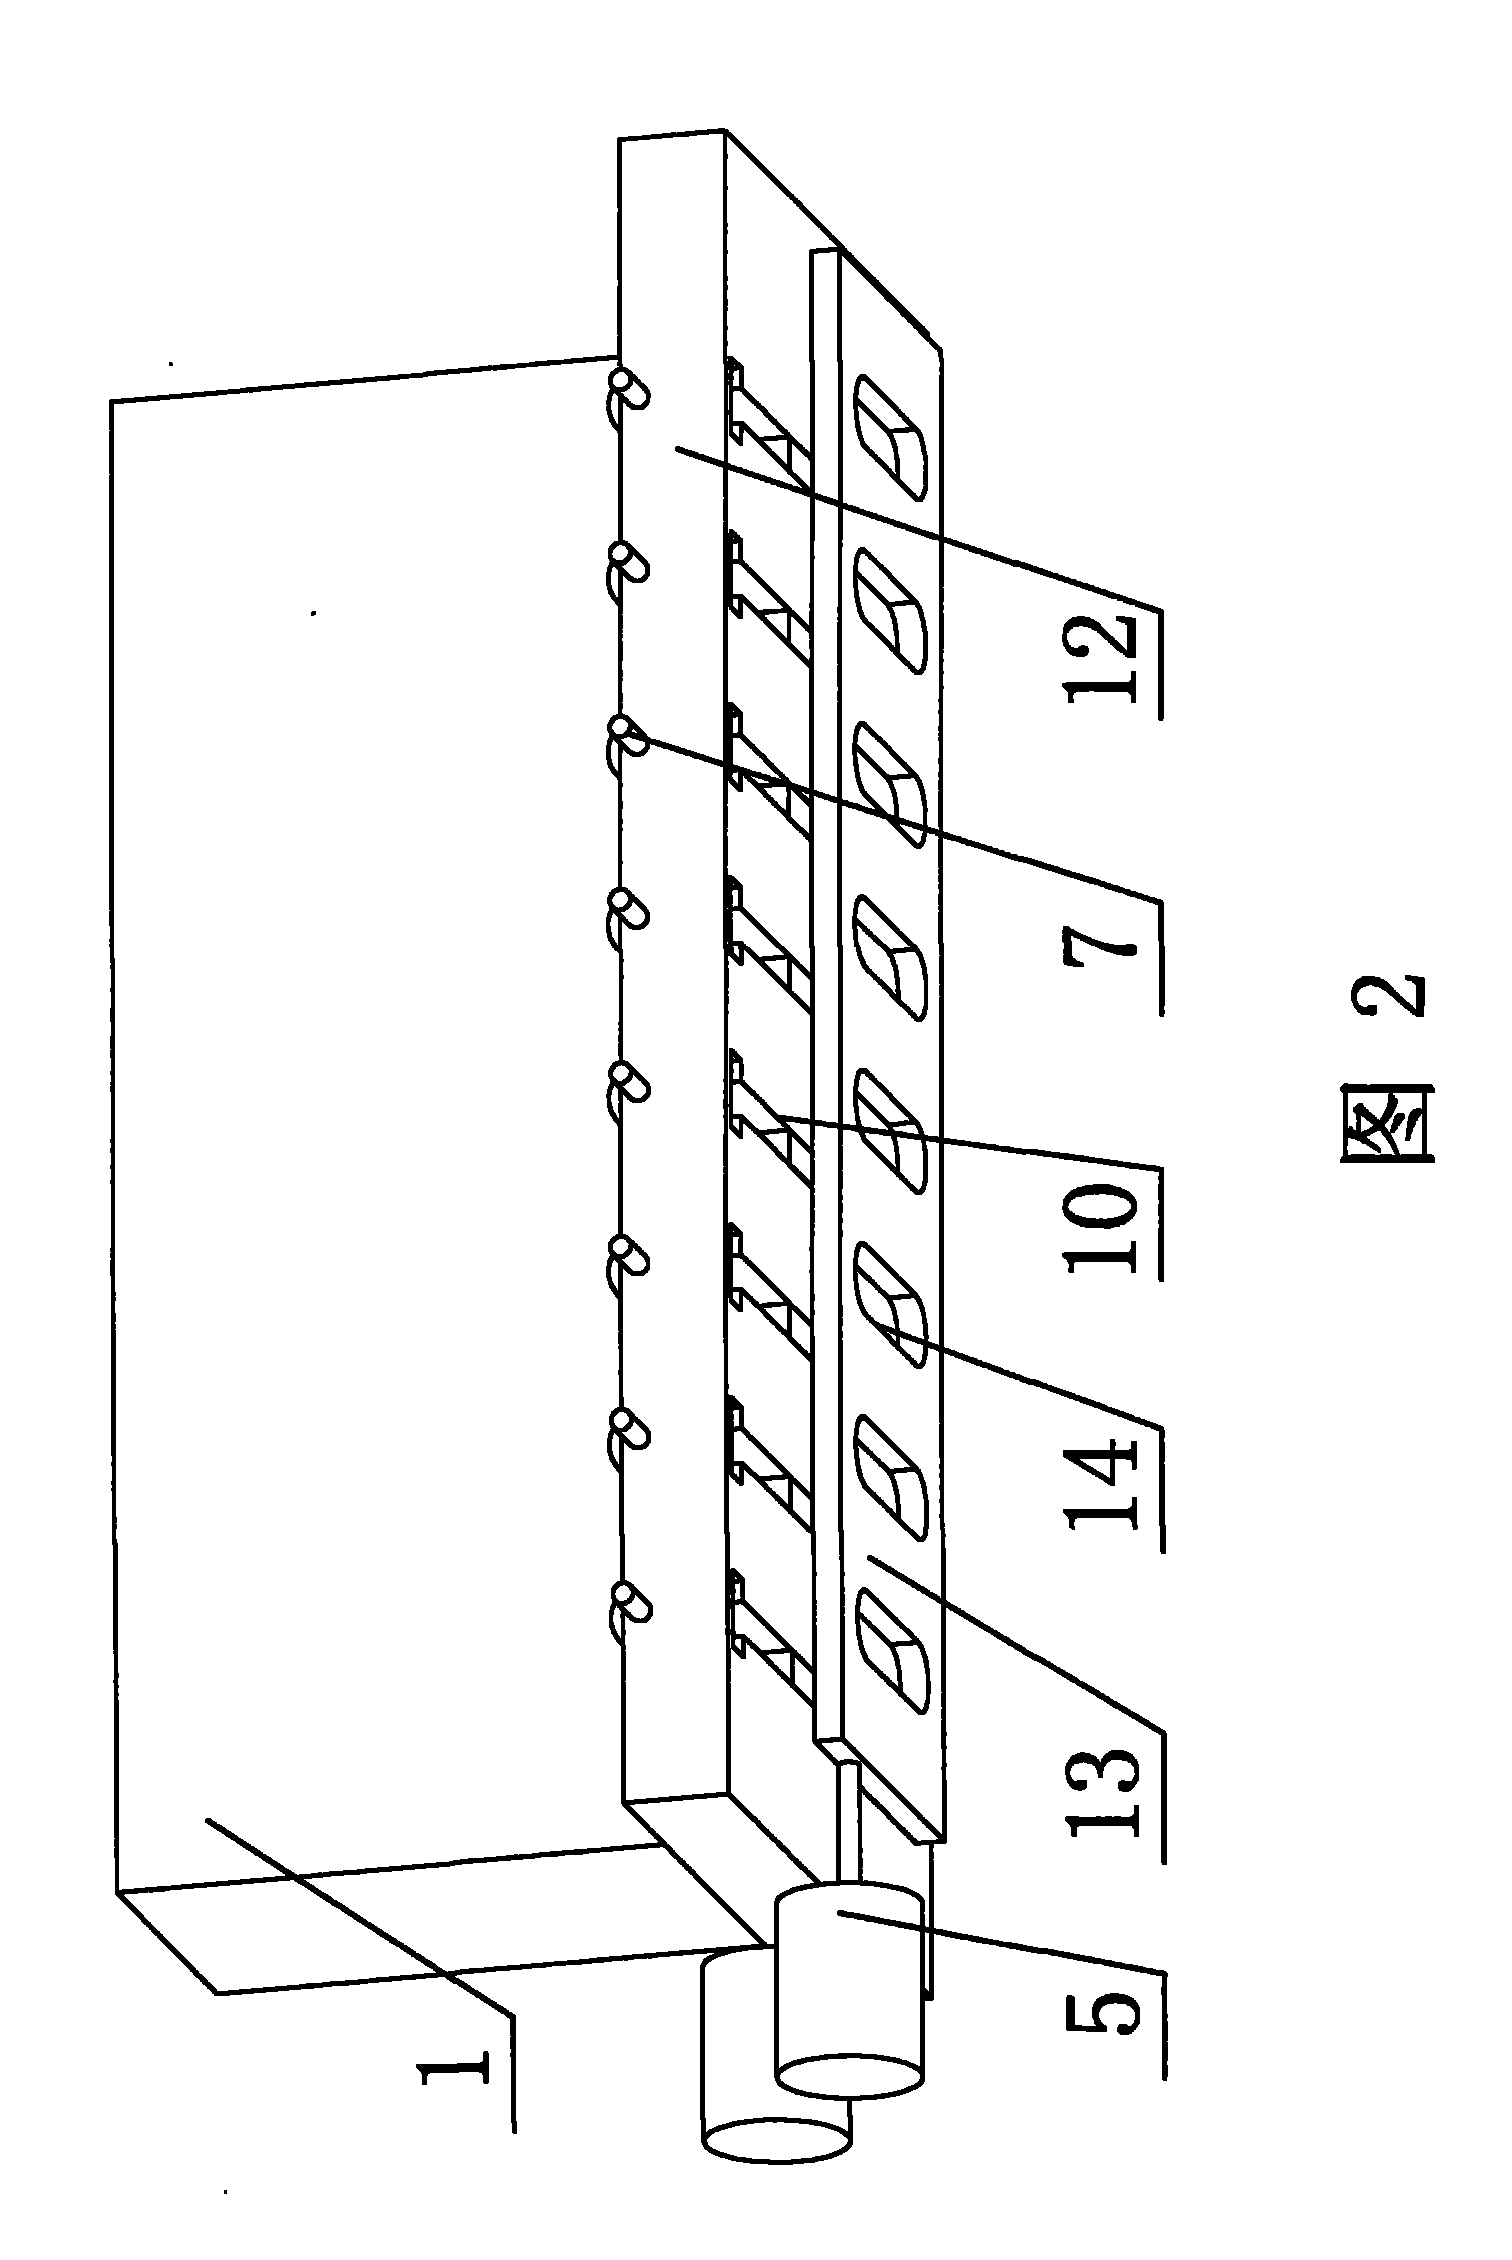 Shutter-style multiple row synchronous metering device